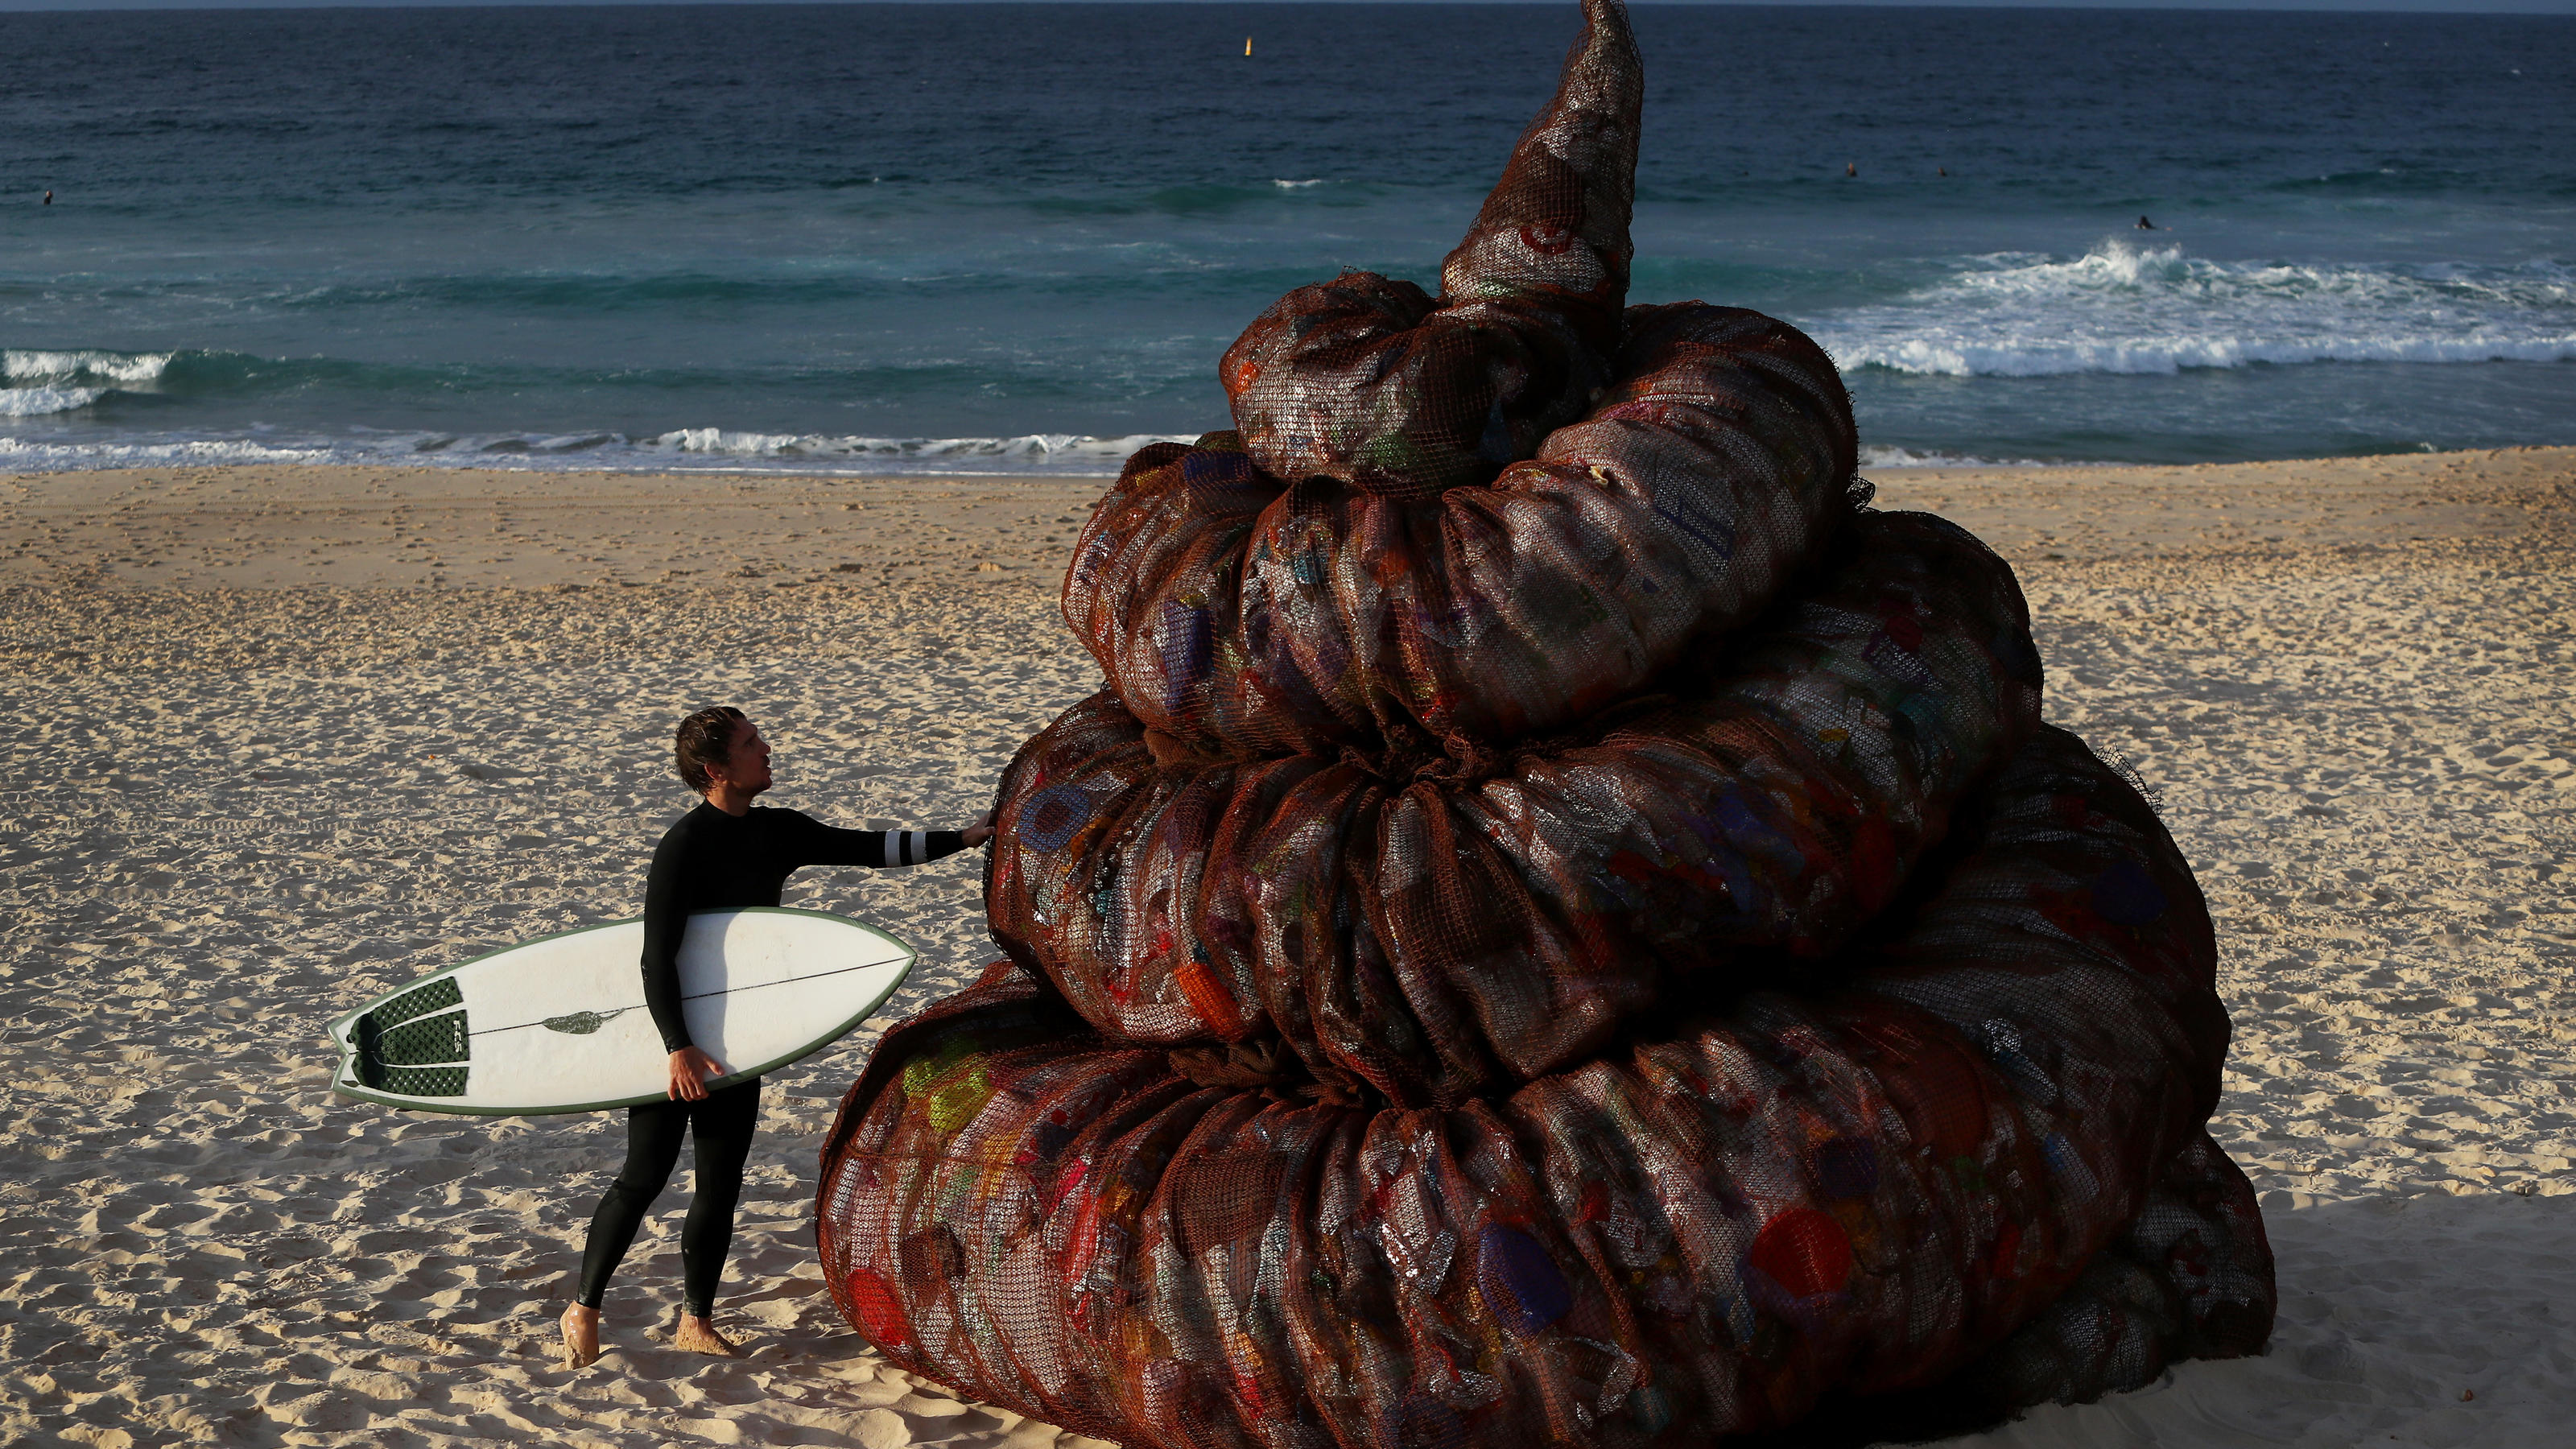 SYDNEY, AUSTRALIA - JUNE 05: A surfer interacts with a sculpture titled 'Plastic pile of sh!t, 2023' presented by Better Packaging Co. at Bondi Beach on June 05, 2023 in Sydney, Australia. The four-metre-high sculpture is made out of recycled plastic